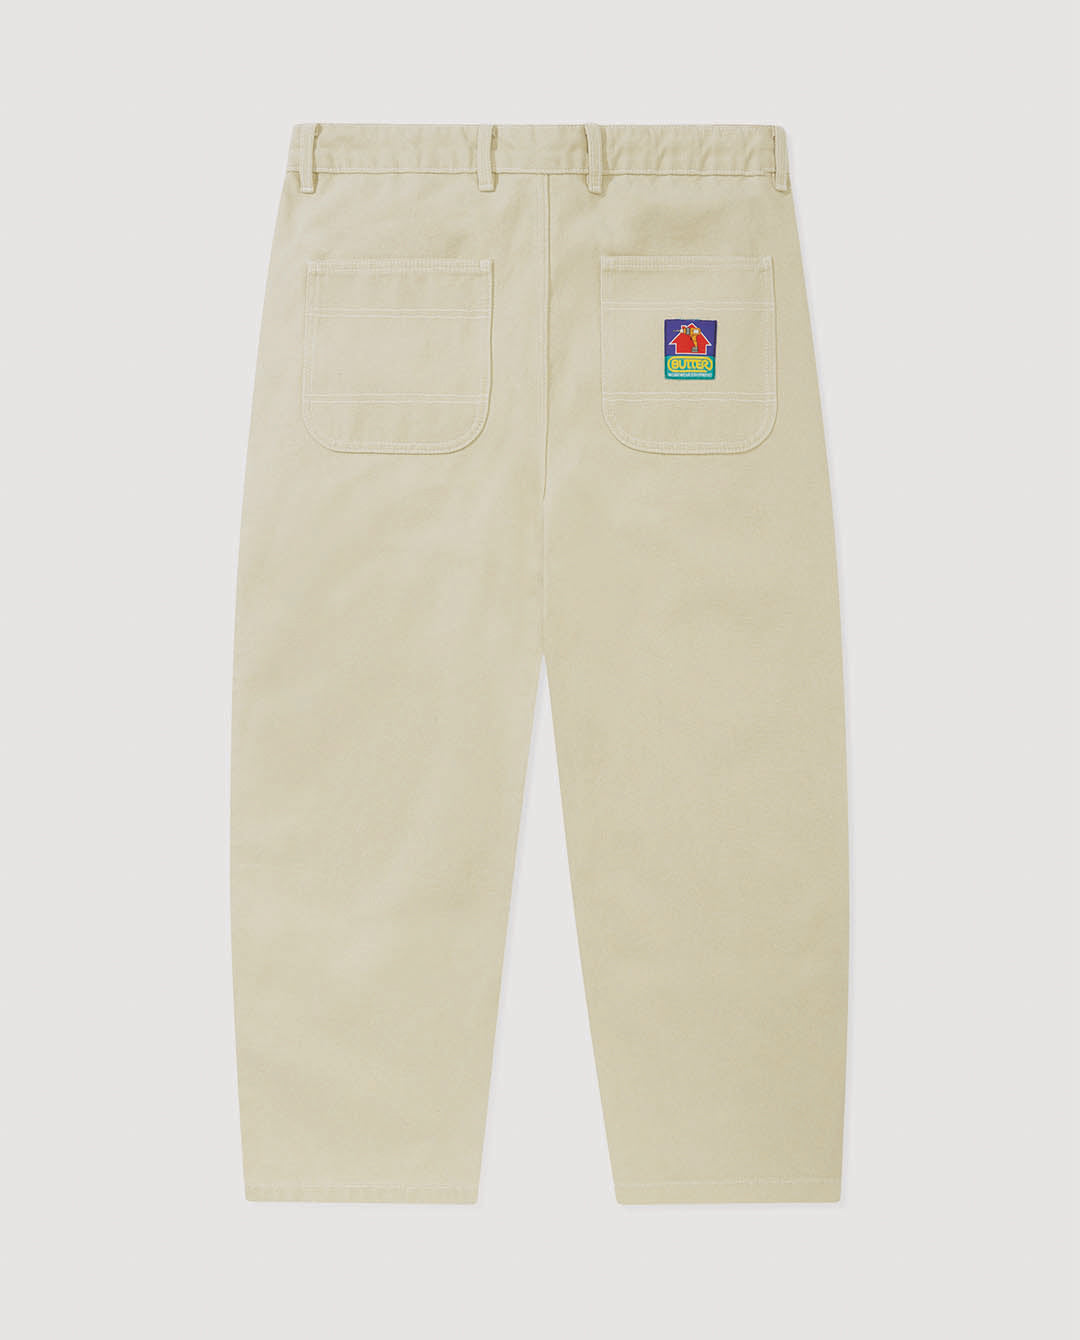 Butter Goods - Work Double Knee Pants - Washed Khaki